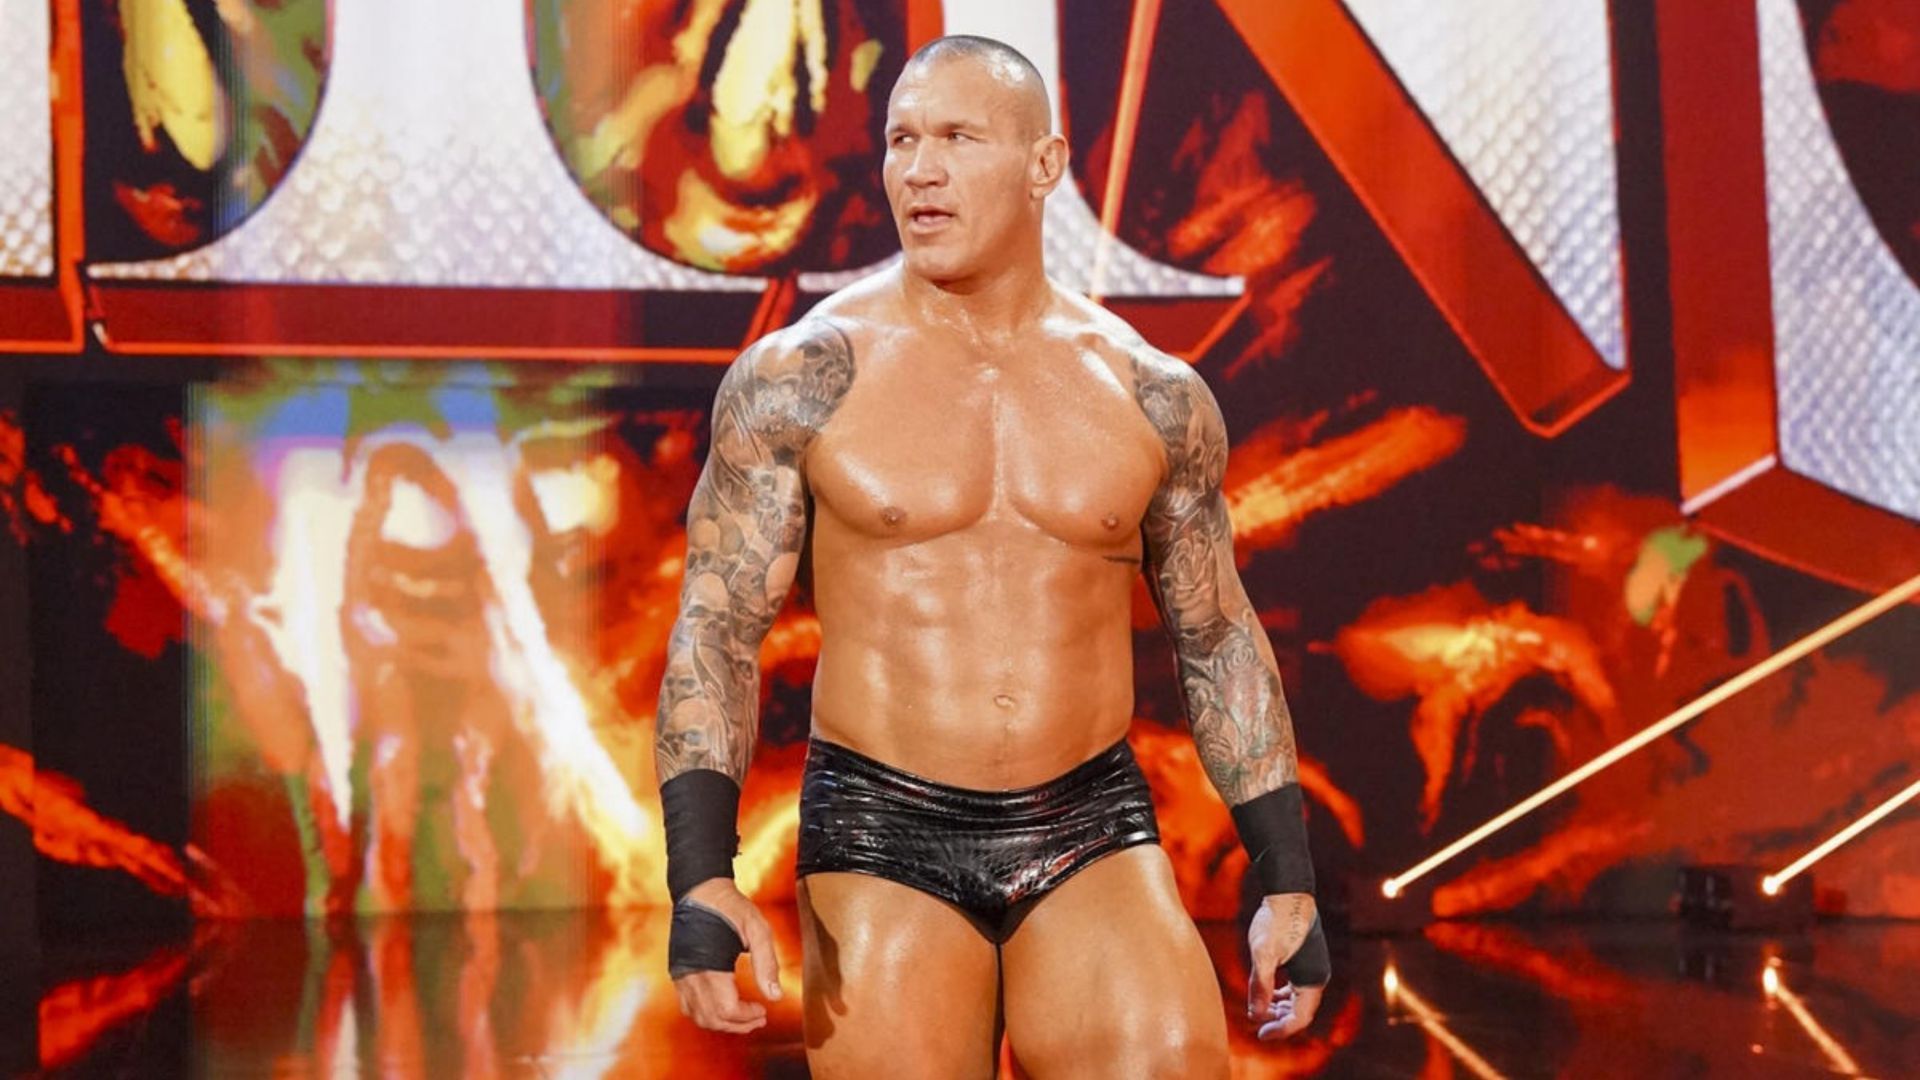 Randy Orton is currently active on WWE SmackDown